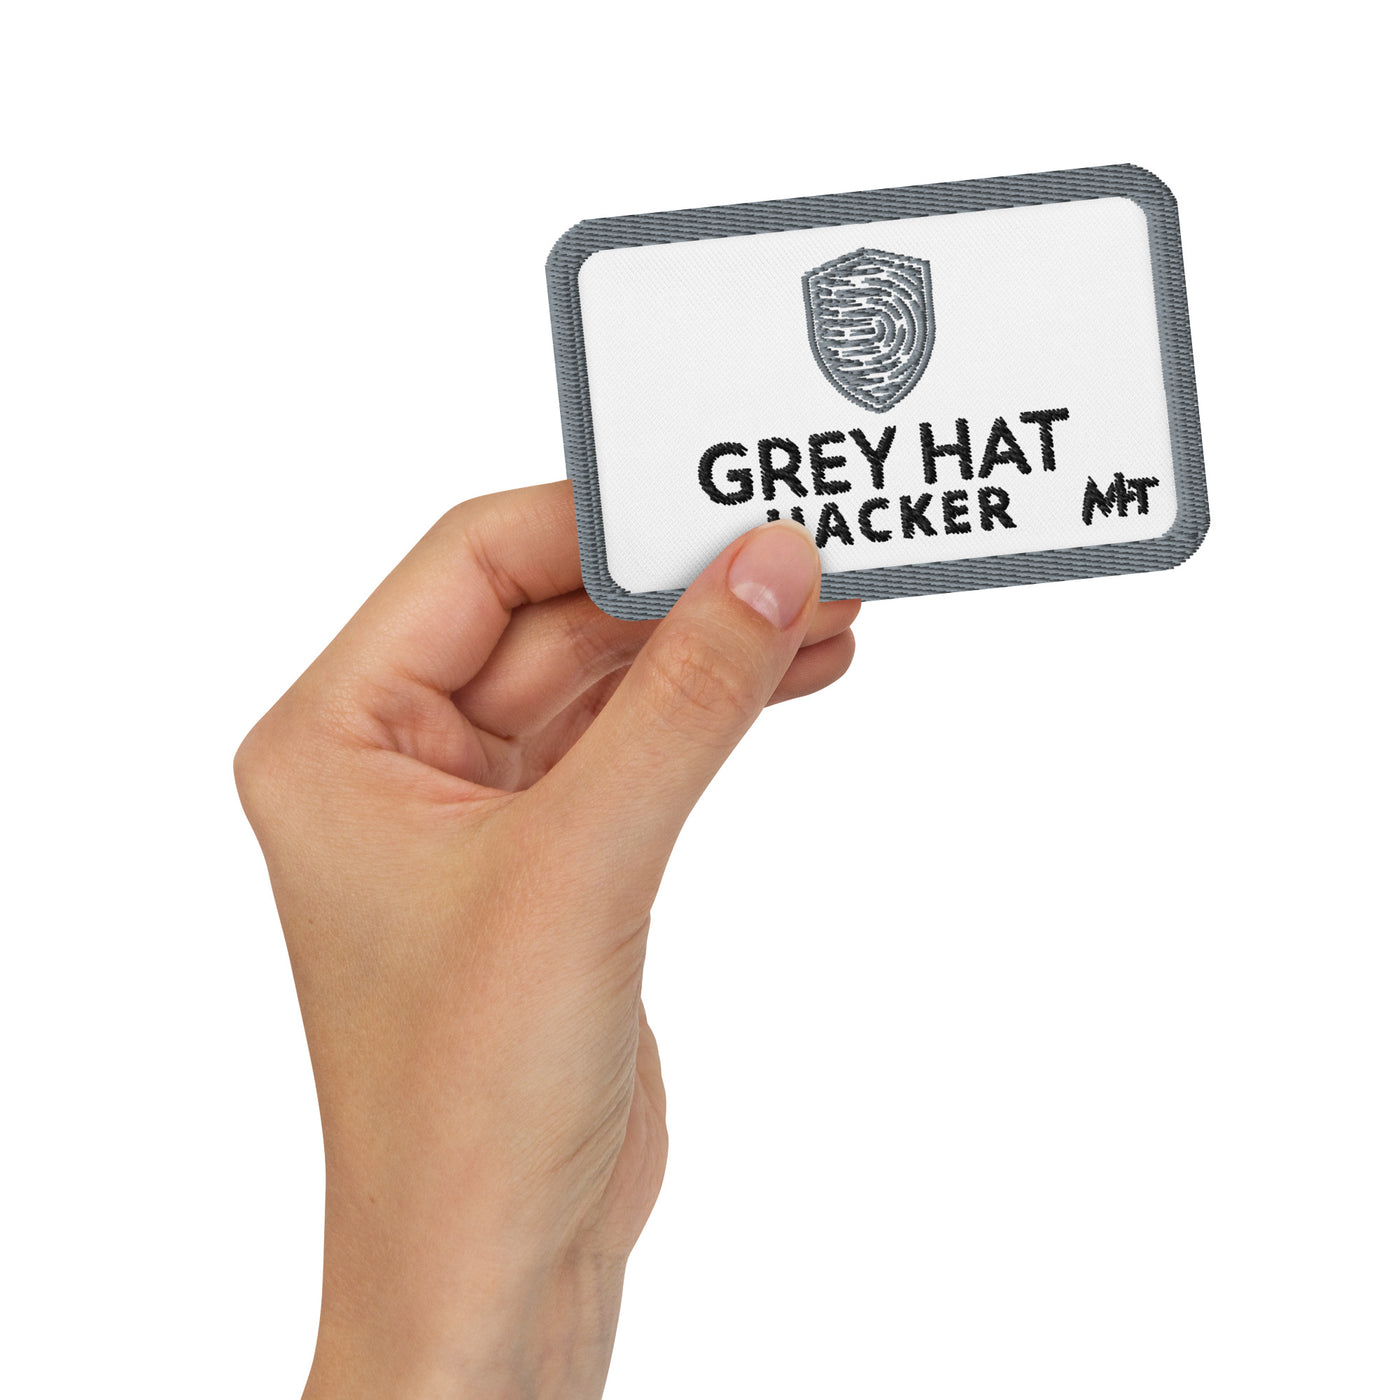 Grey Hat Hacker V1 - Embroidered patches